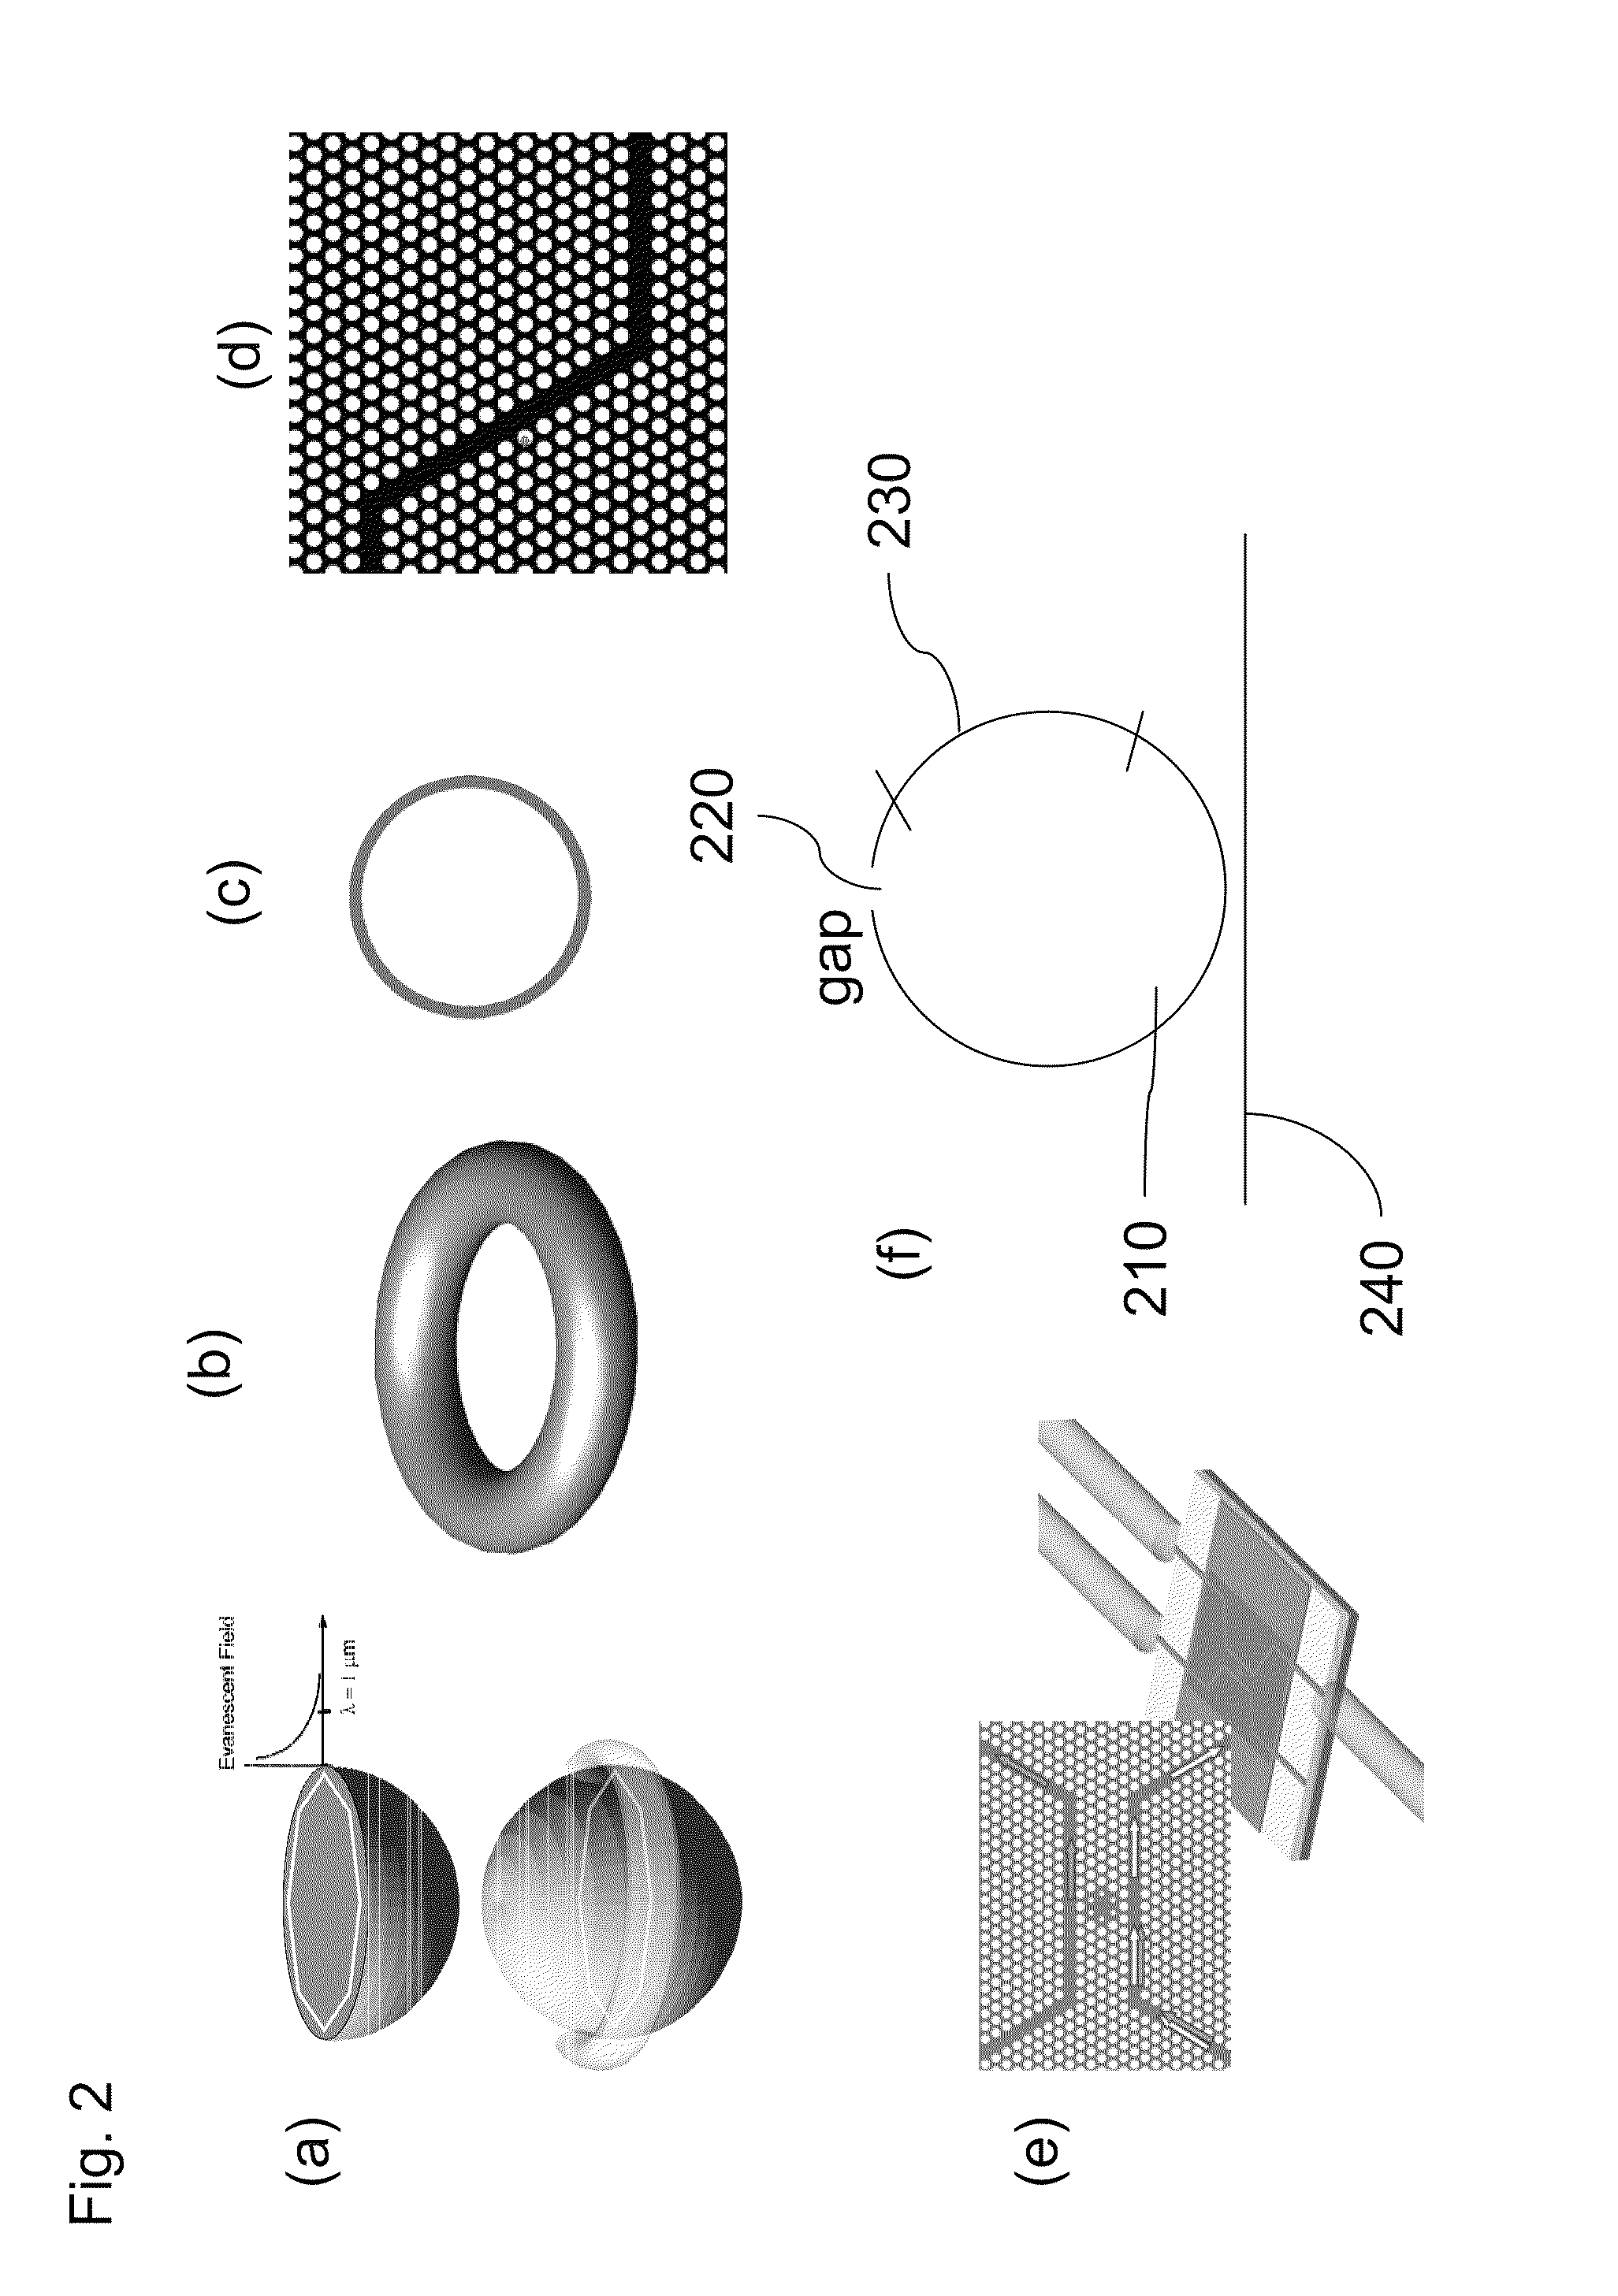 Methods, materials and devices for light manipulation with oriented molecular assemblies in micronscale photonic circuit elements with High-Q or slow light